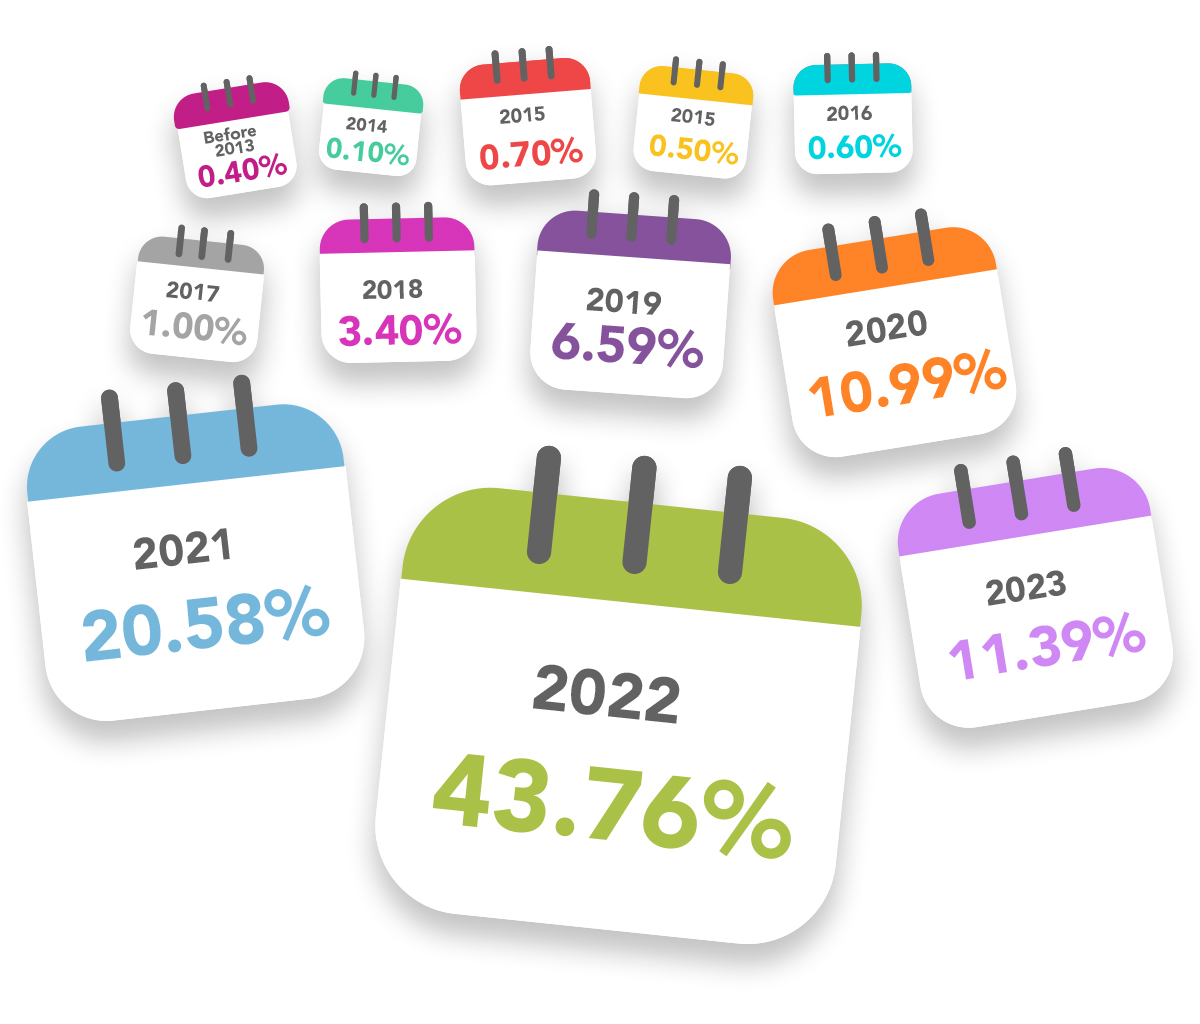 Multicoloured graphic displaying poll results of 1001 people that shows the year they last used bridging finance. The most popular year was 2022 (43.76% of respondents).